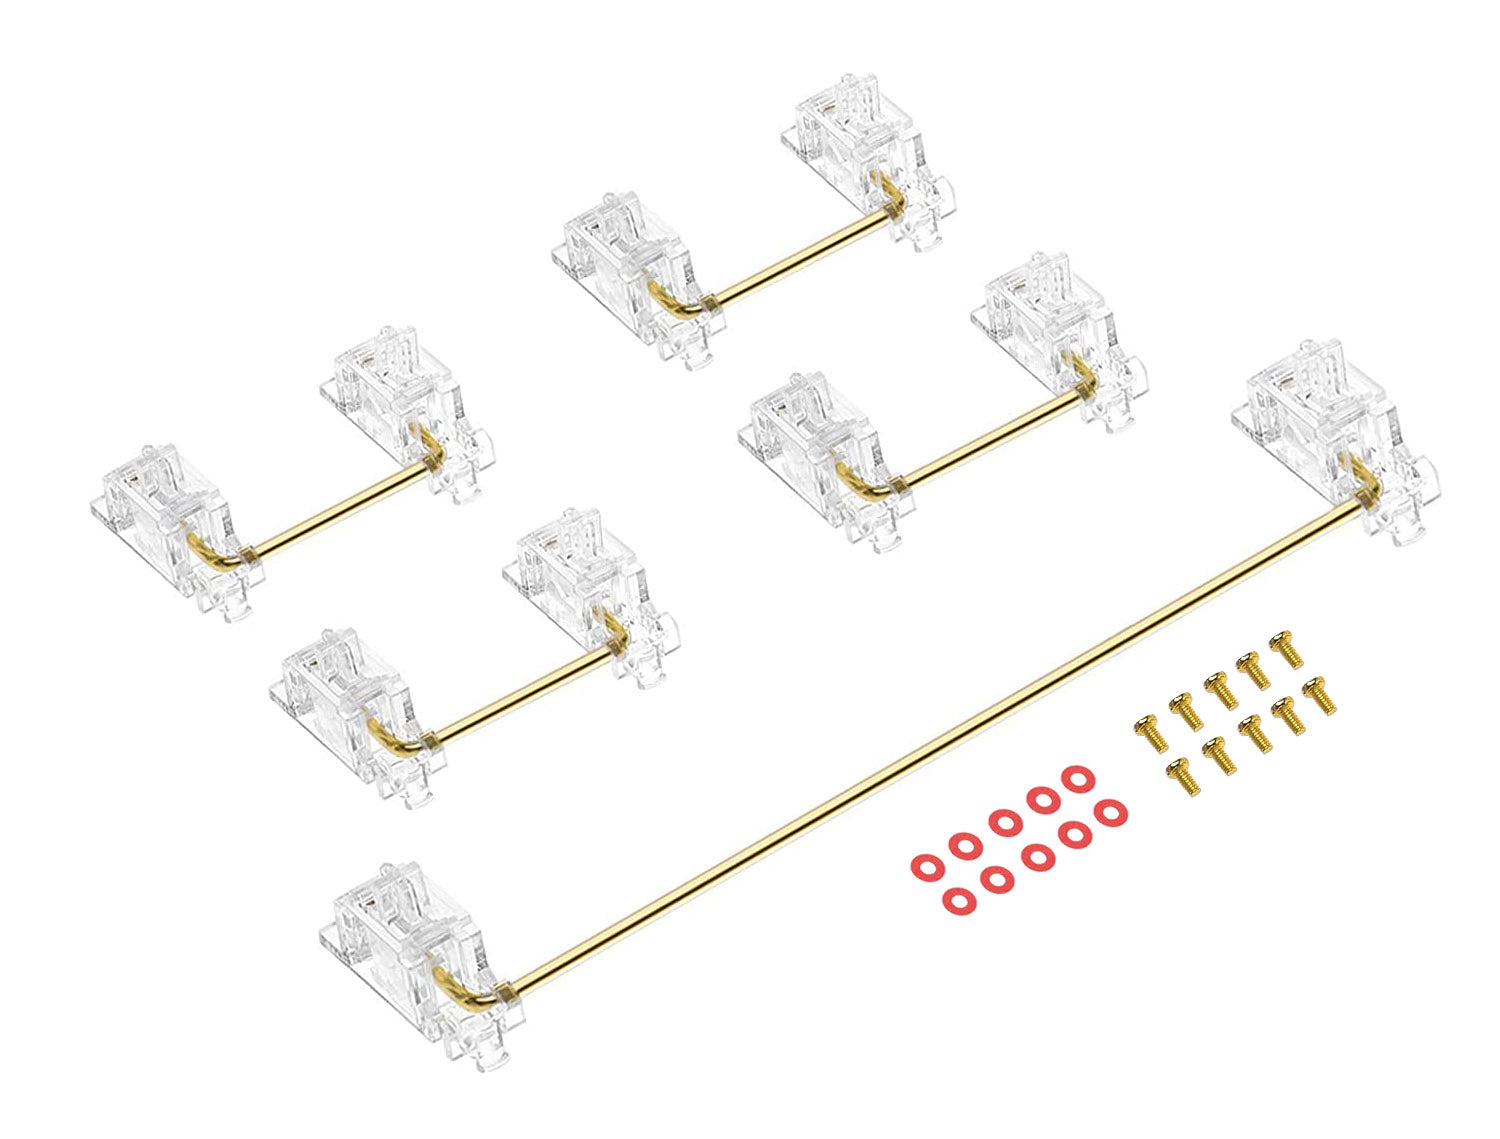 Durock V2 Stabilizers Clear Gold Plated PCB Screw-in MK0JRK6IPT |0|